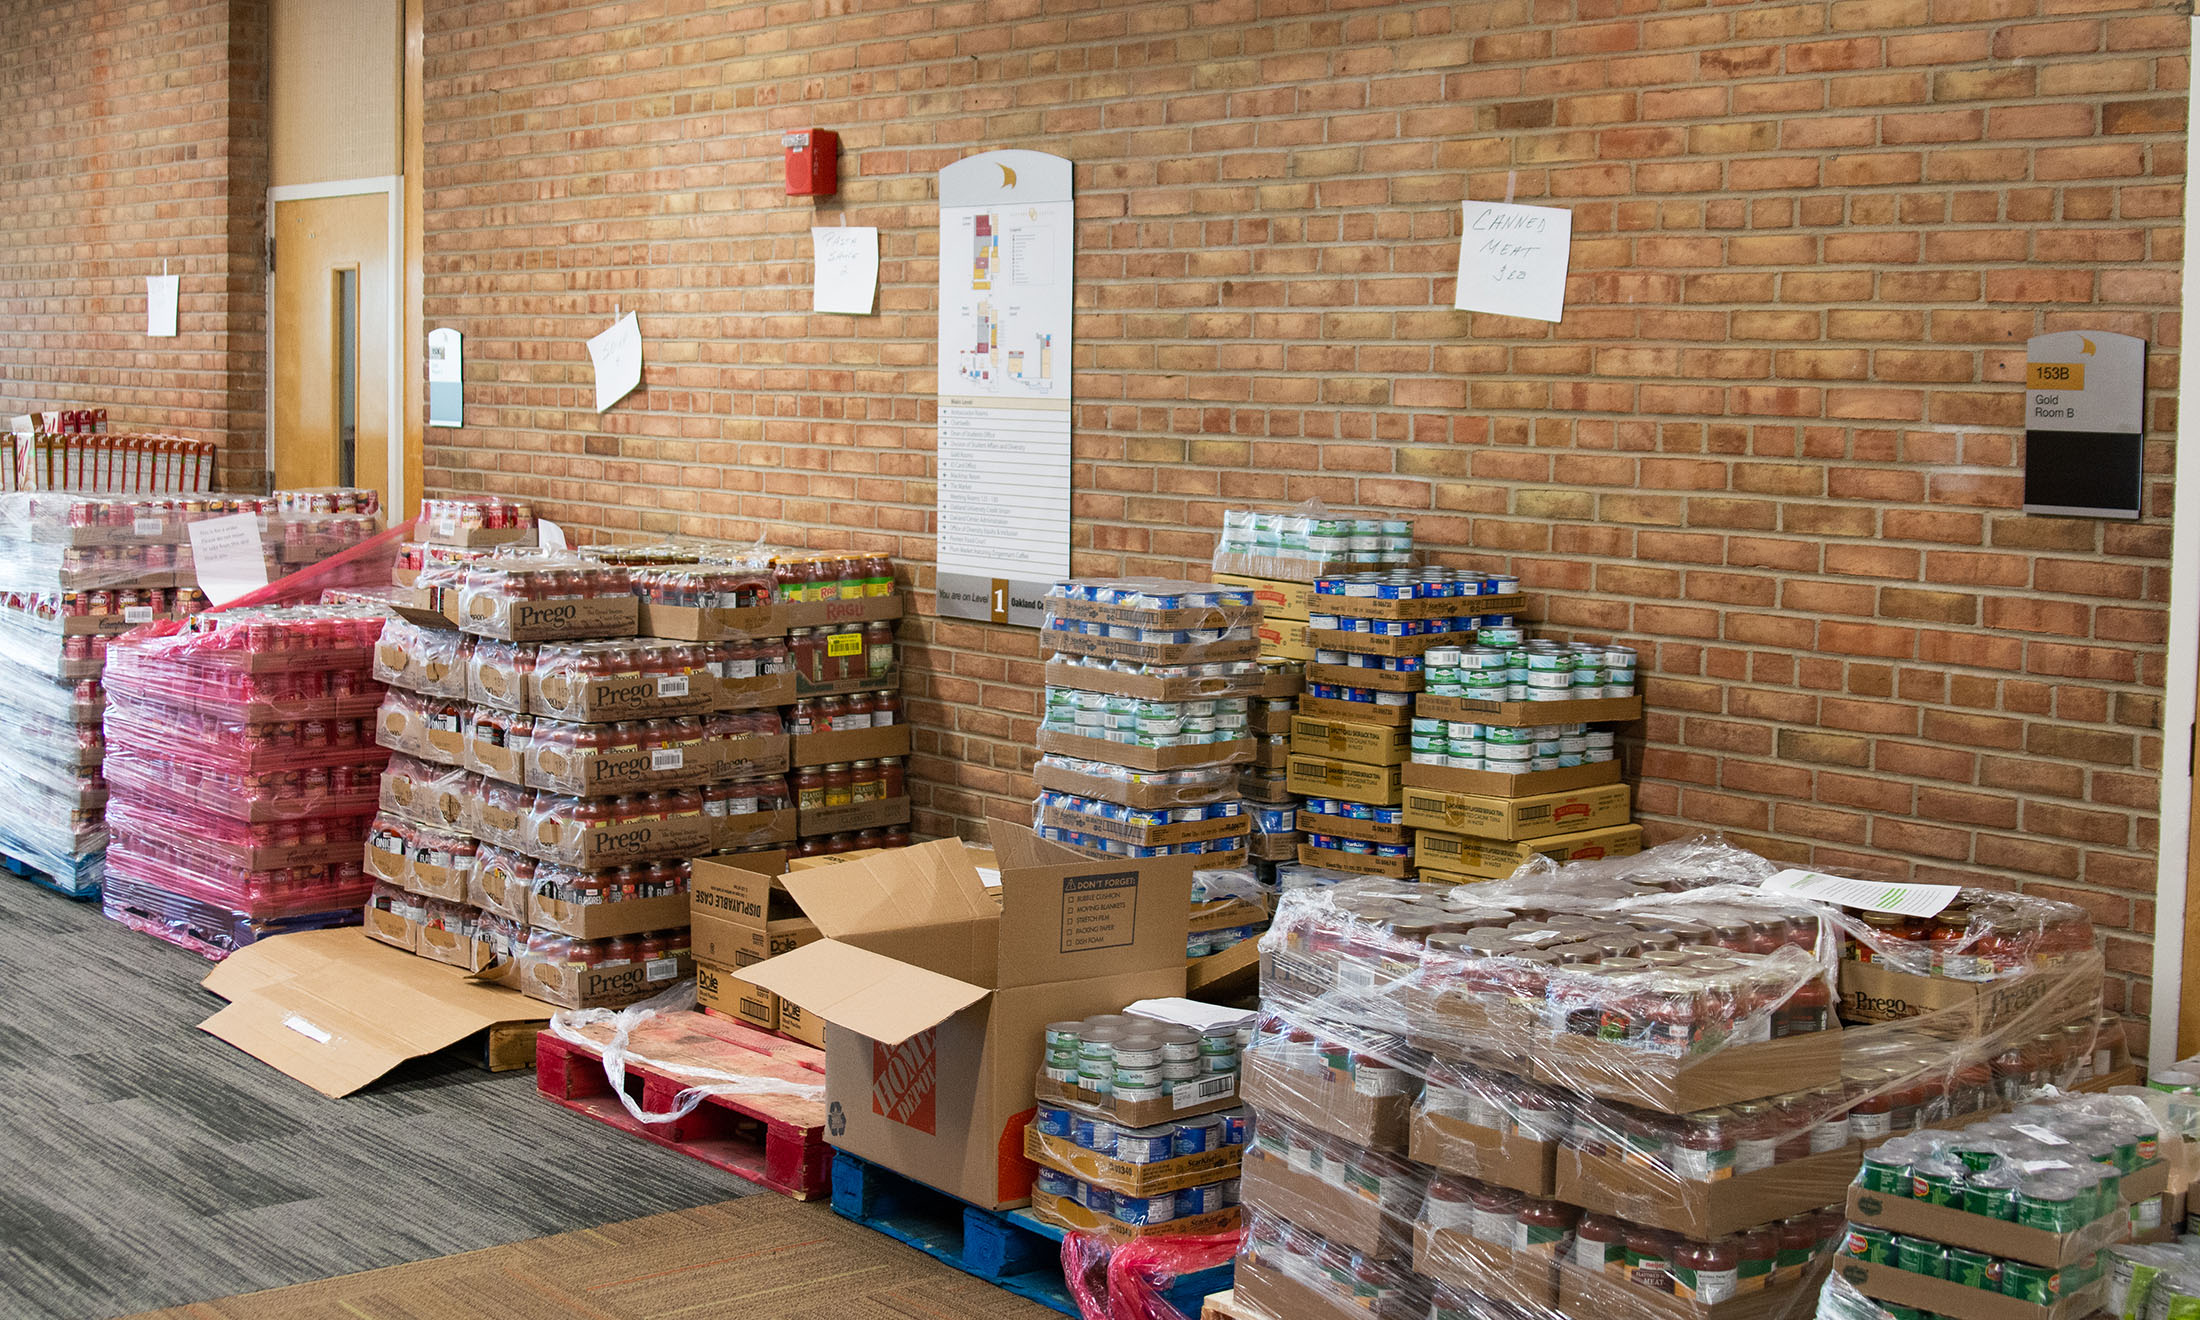 Boxes of food stacked along wall in building